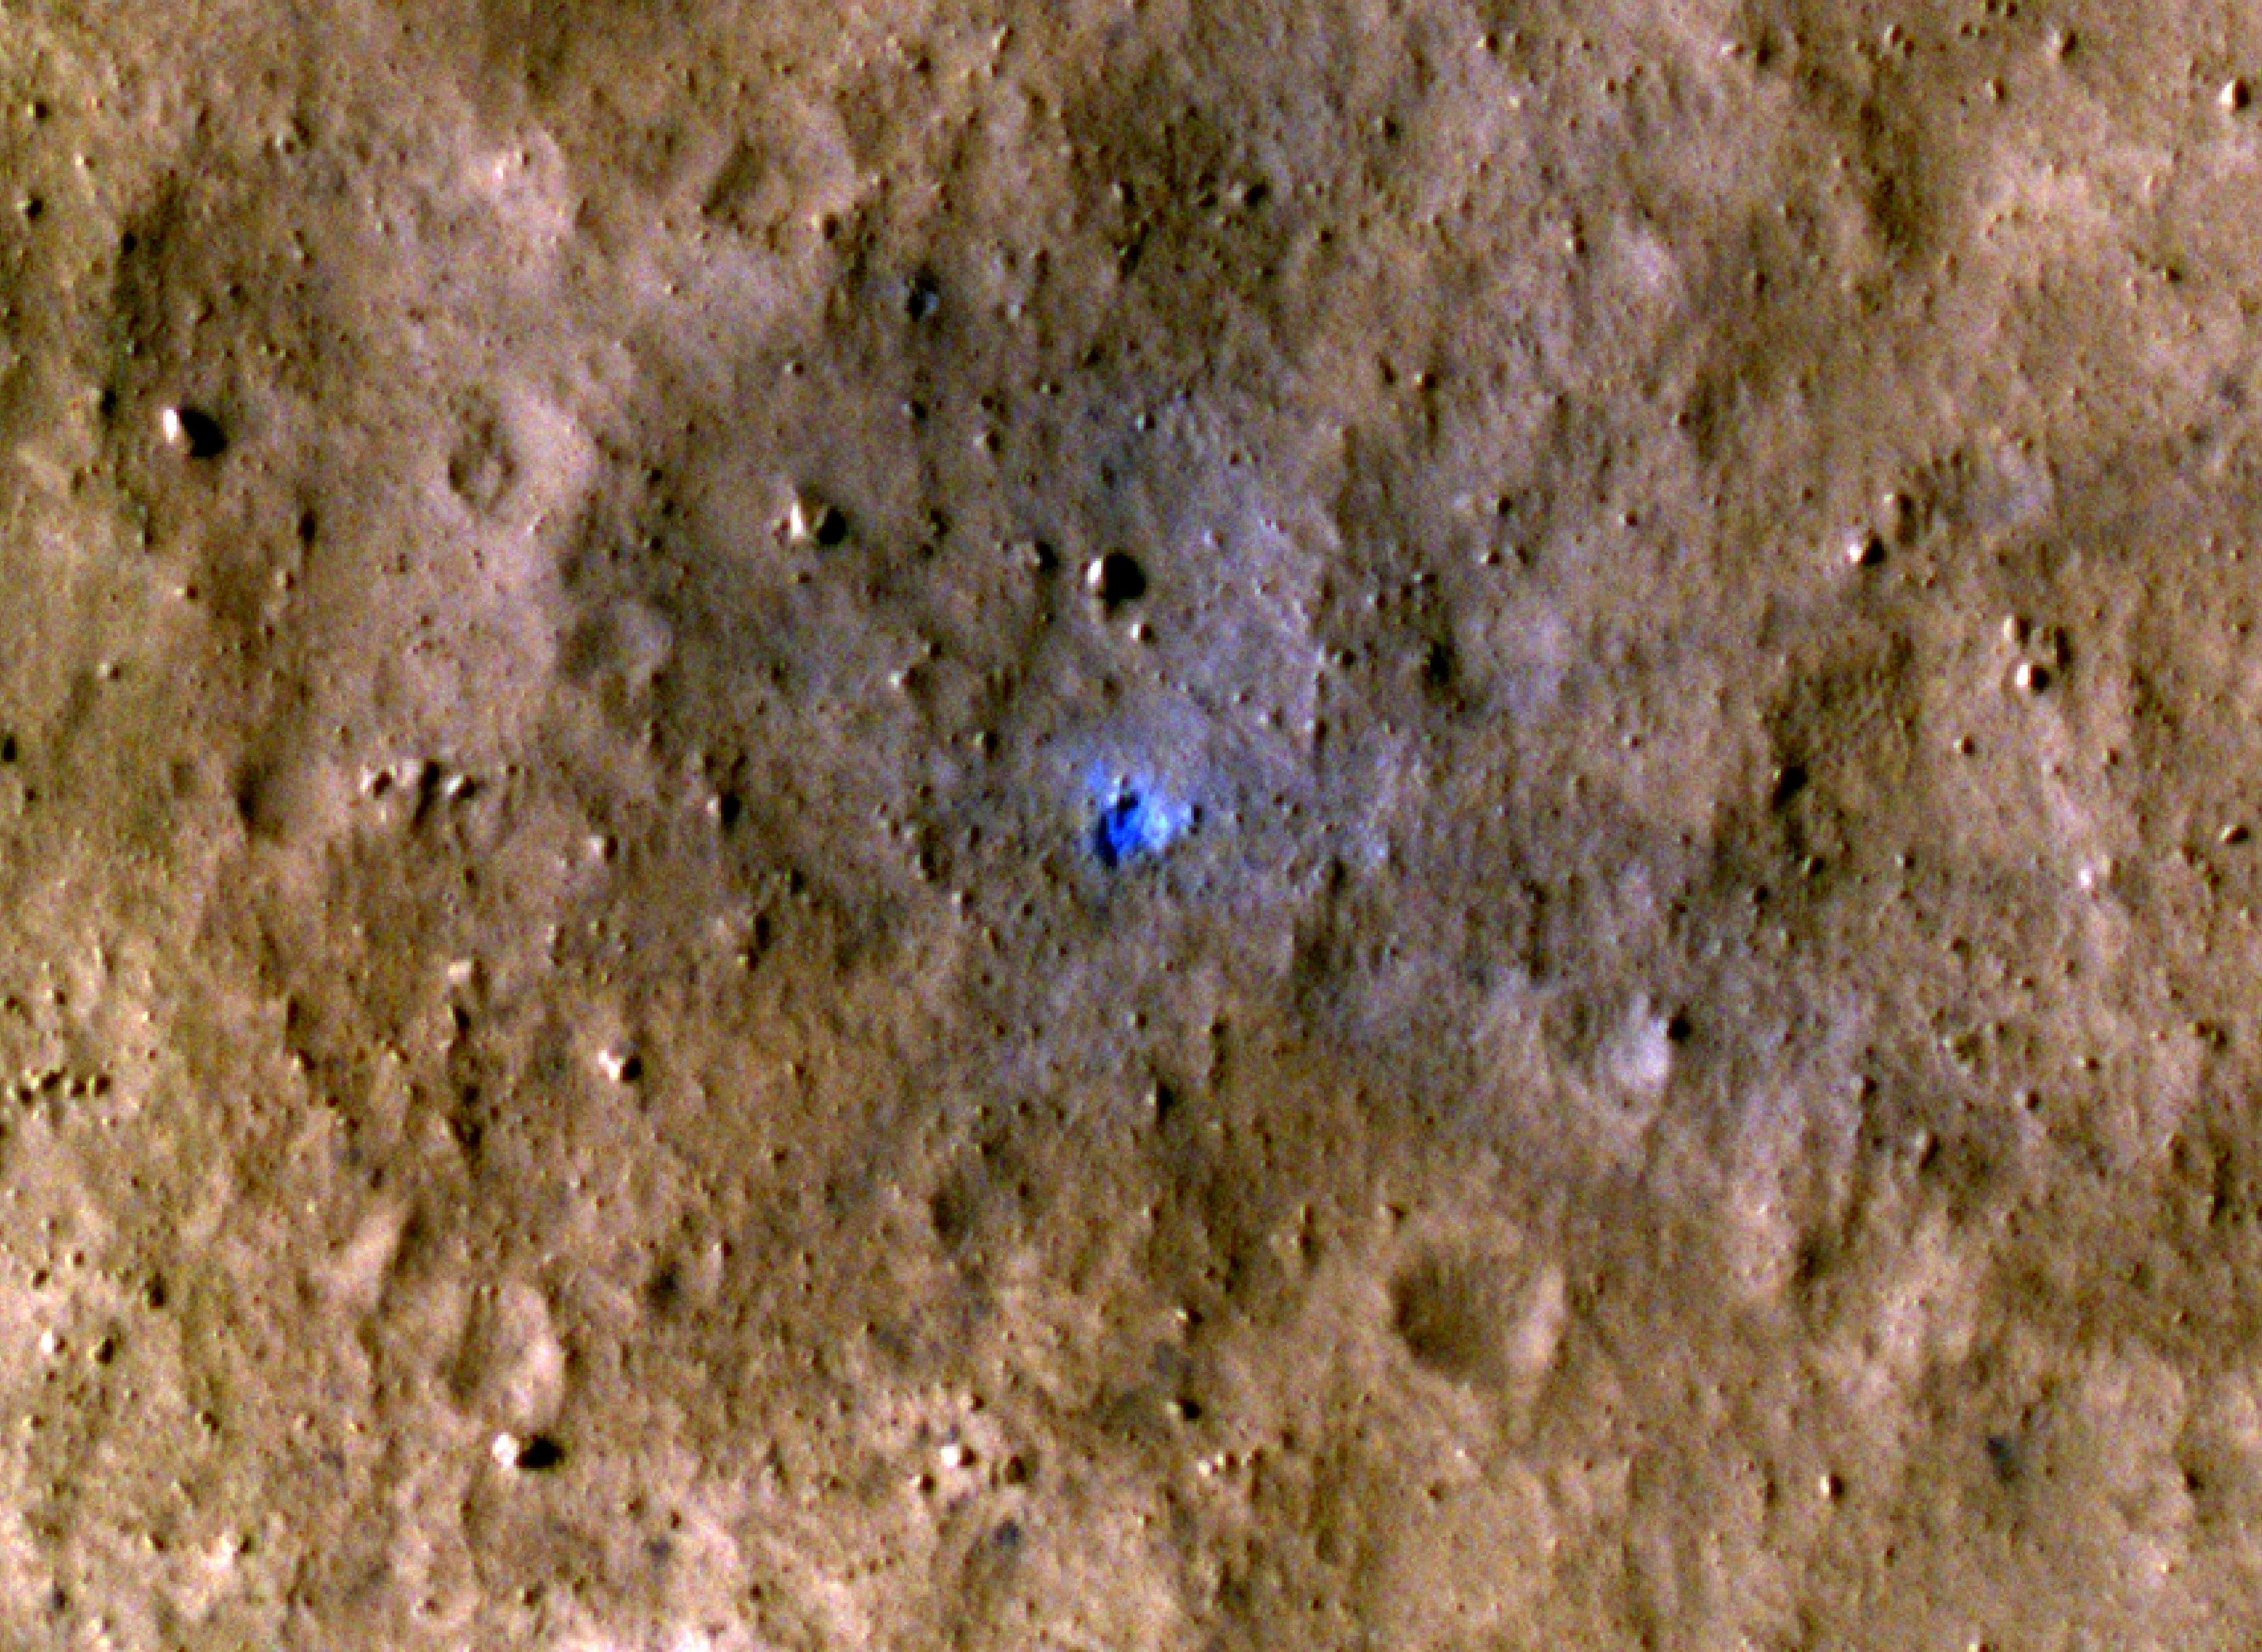 NASAs Mars Reconnaissance Orbiter captured this image of a meteoroid impact that was first detected by the agencys InSight lander using its seismometer. This crater was formed on Aug. 30, 2021.